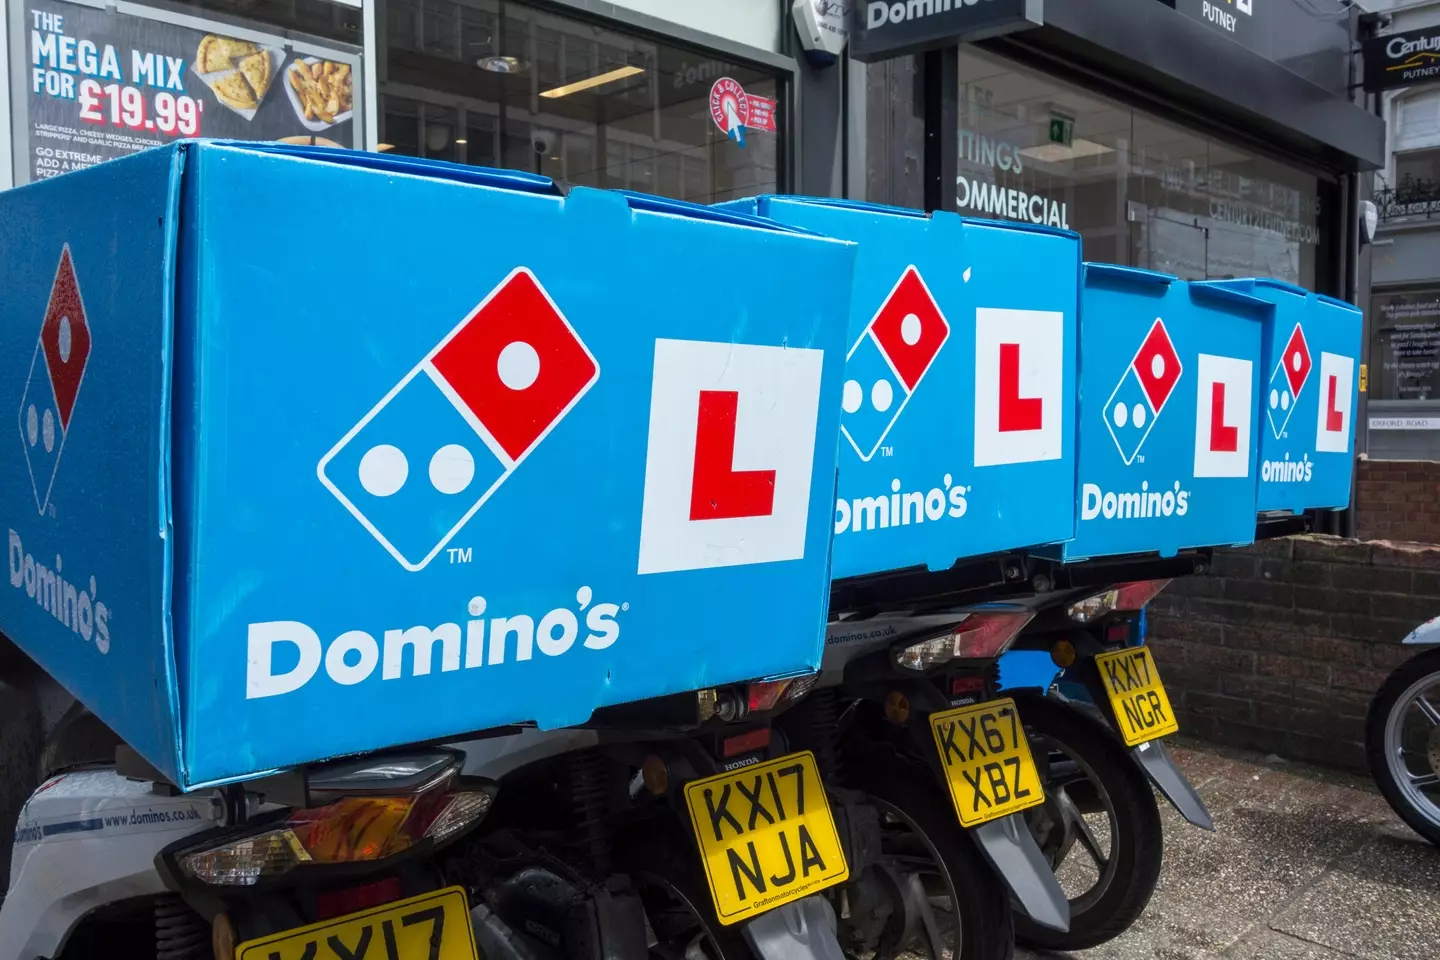 Some people were shocked at how much Domino's drivers make from tips.